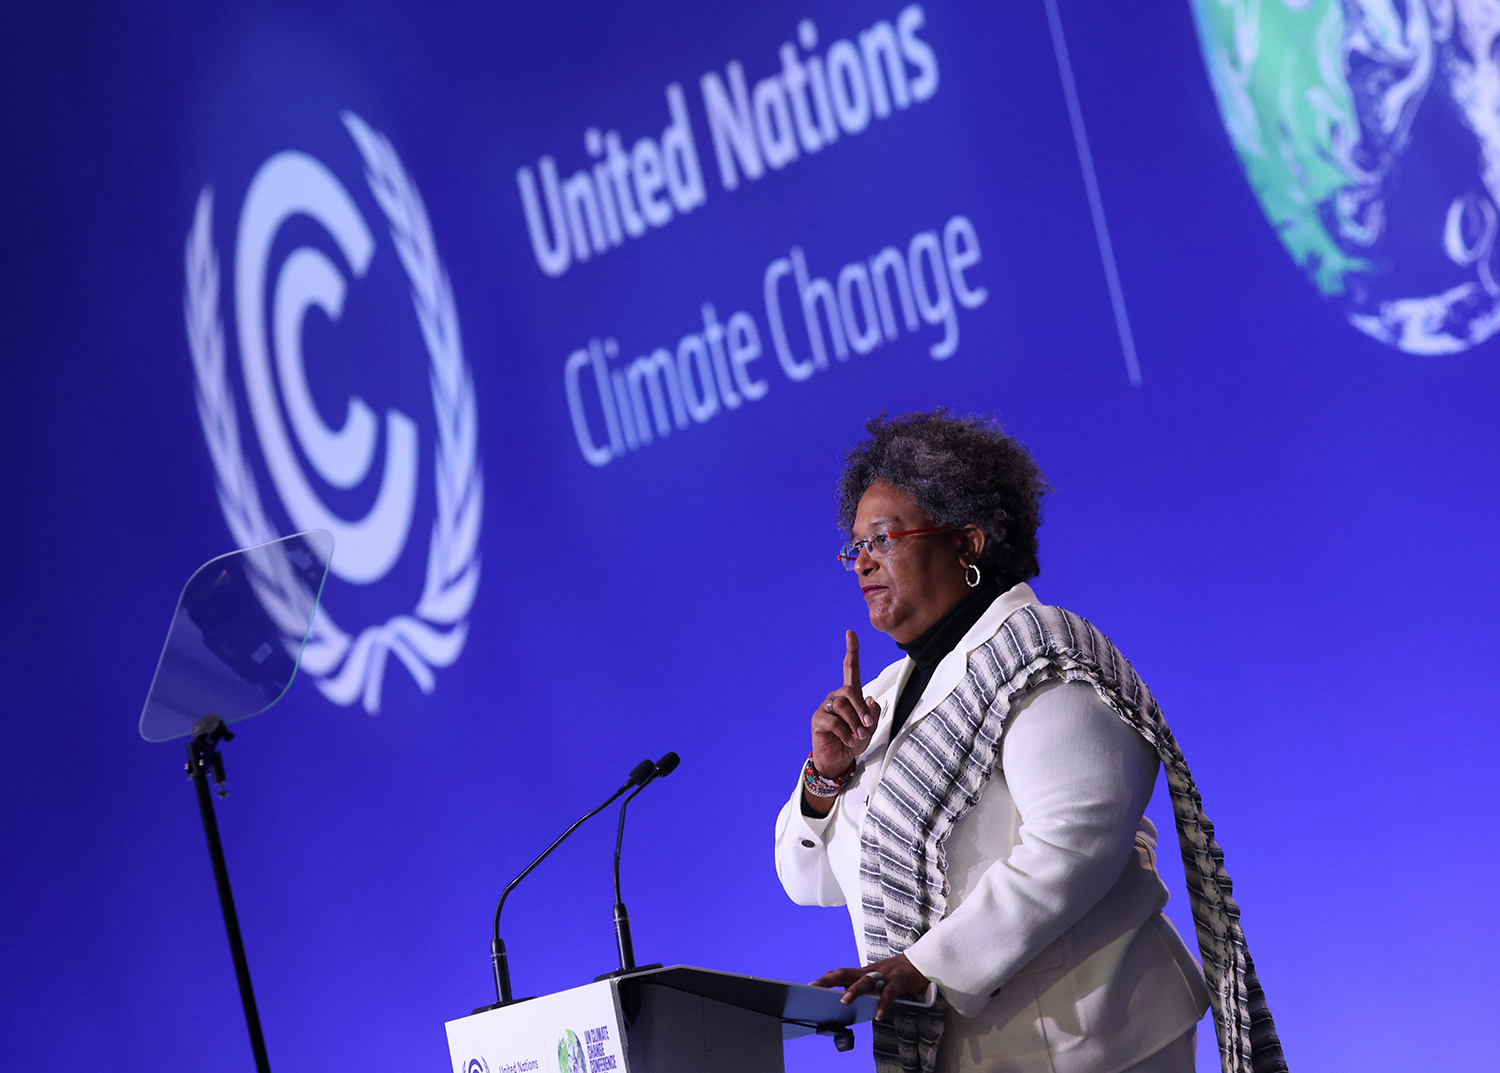 Mia Mottley, the prime minister of Barbados, wearing a white suit with patterned fabric on the shoulder, speaks from a podium under a sign that reads "United Nations Climate Change."